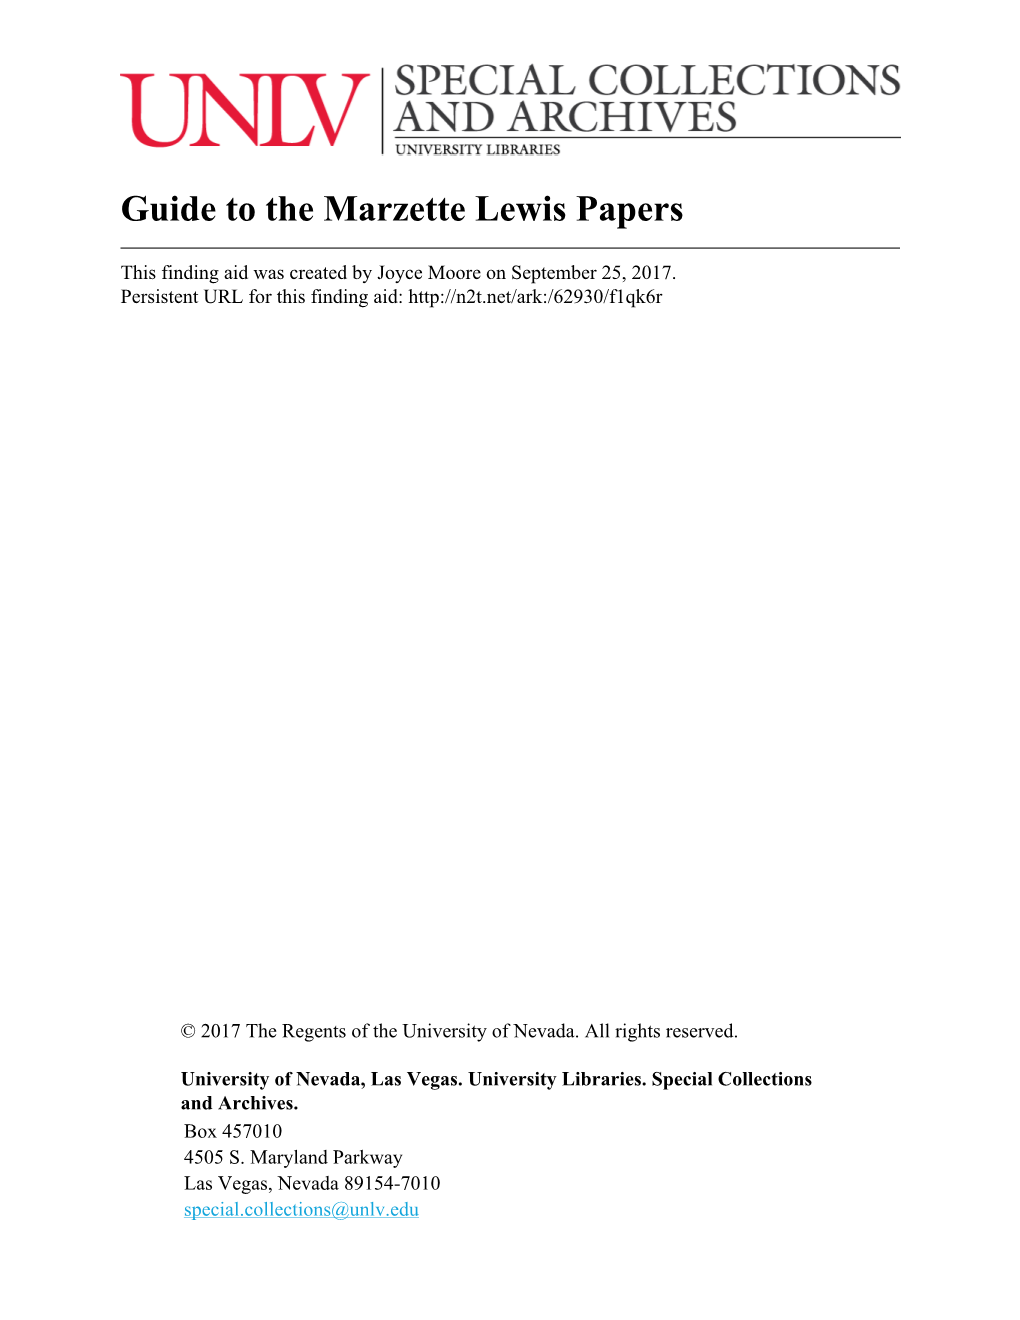 Guide to the Marzette Lewis Papers